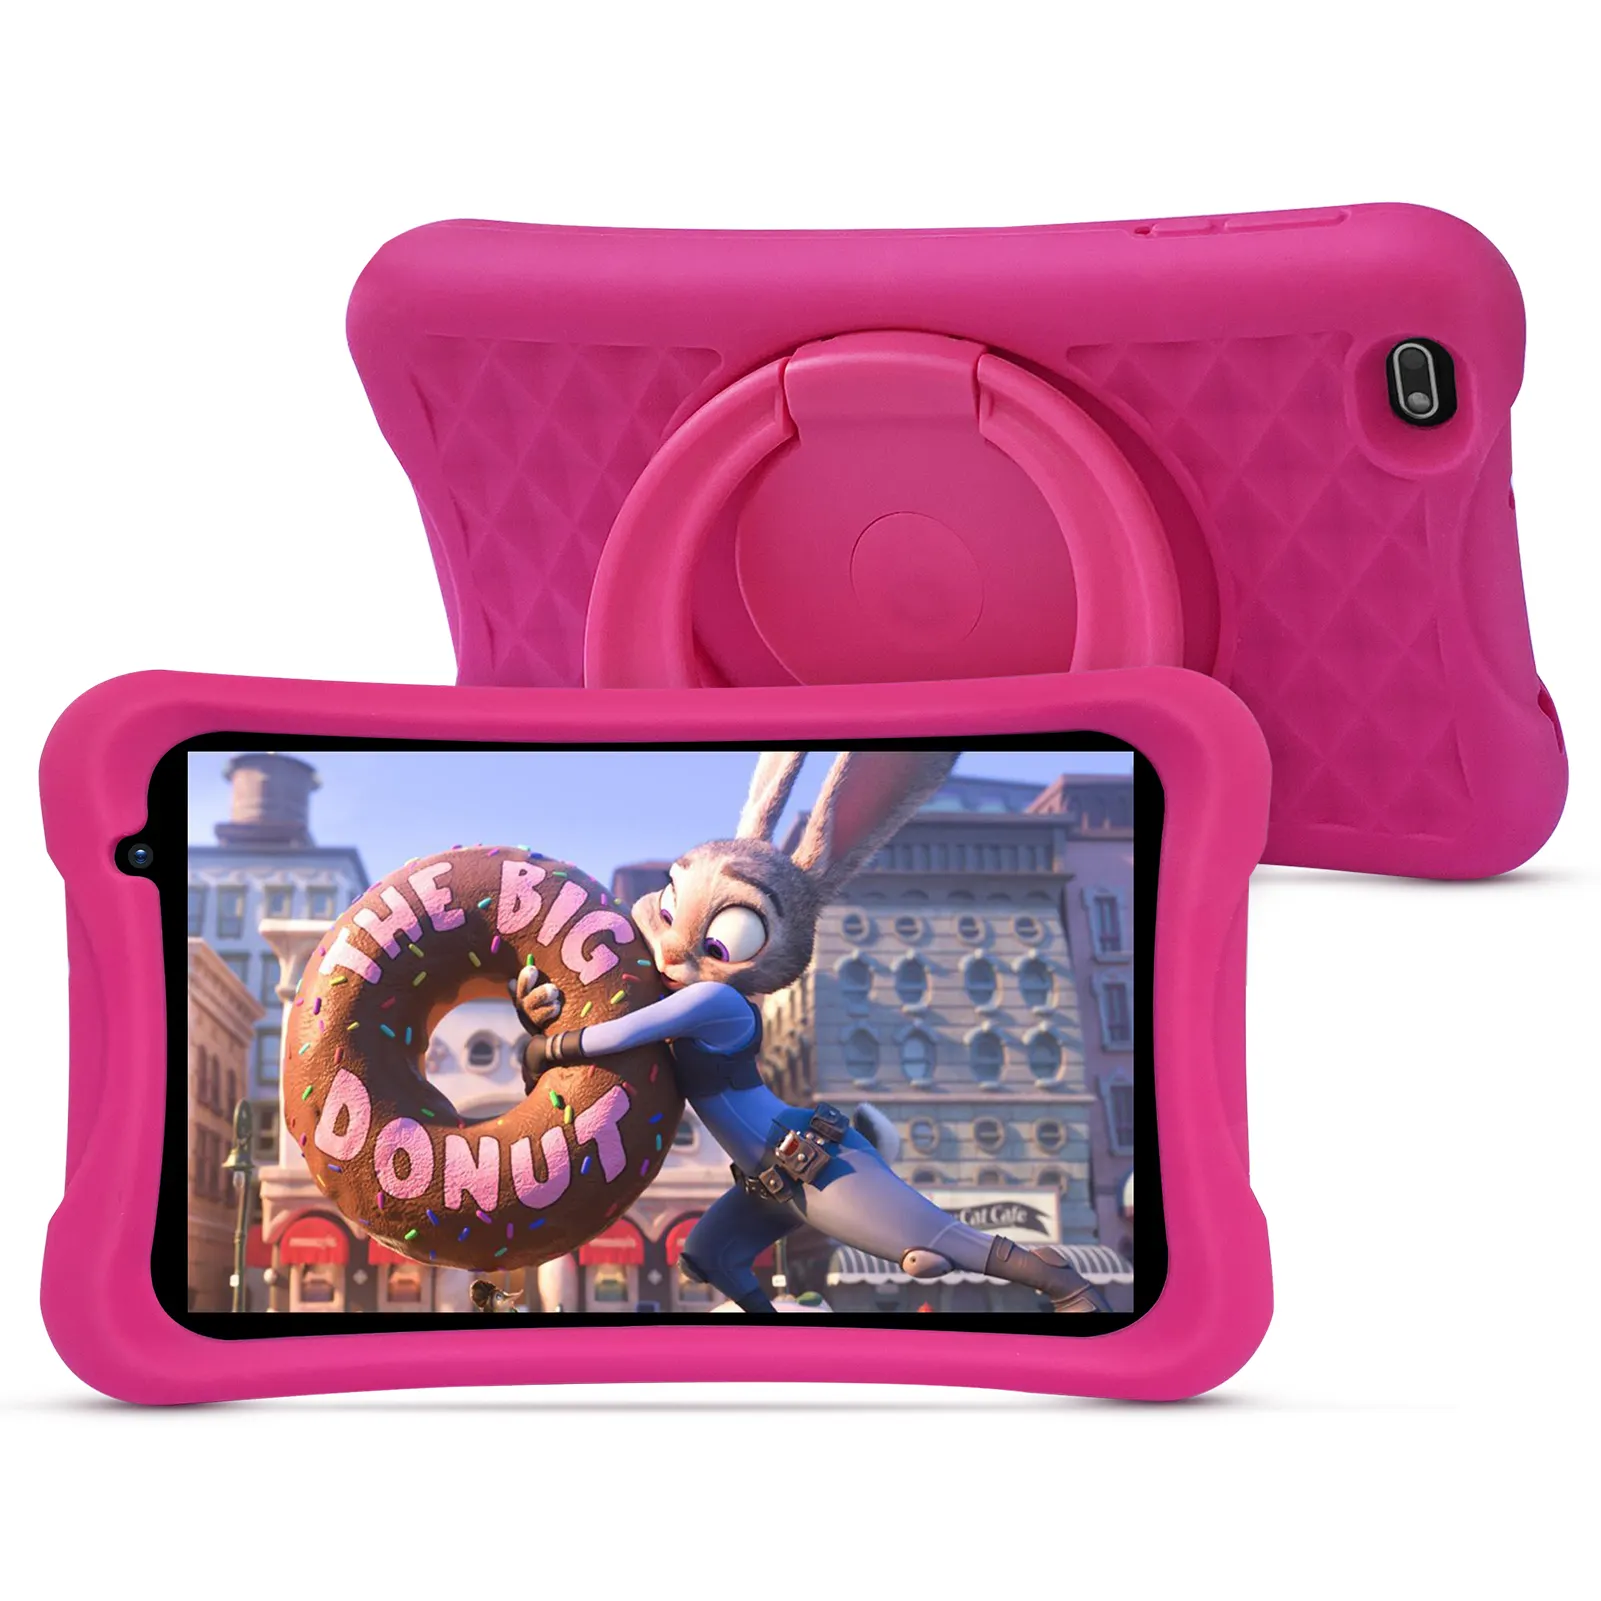 PRITOM Home Use Kids Tablet Android Children Tablet Unisoc SC7731E Quad-core L8K Pink WIFI Education Kids Tablet 8 Inch